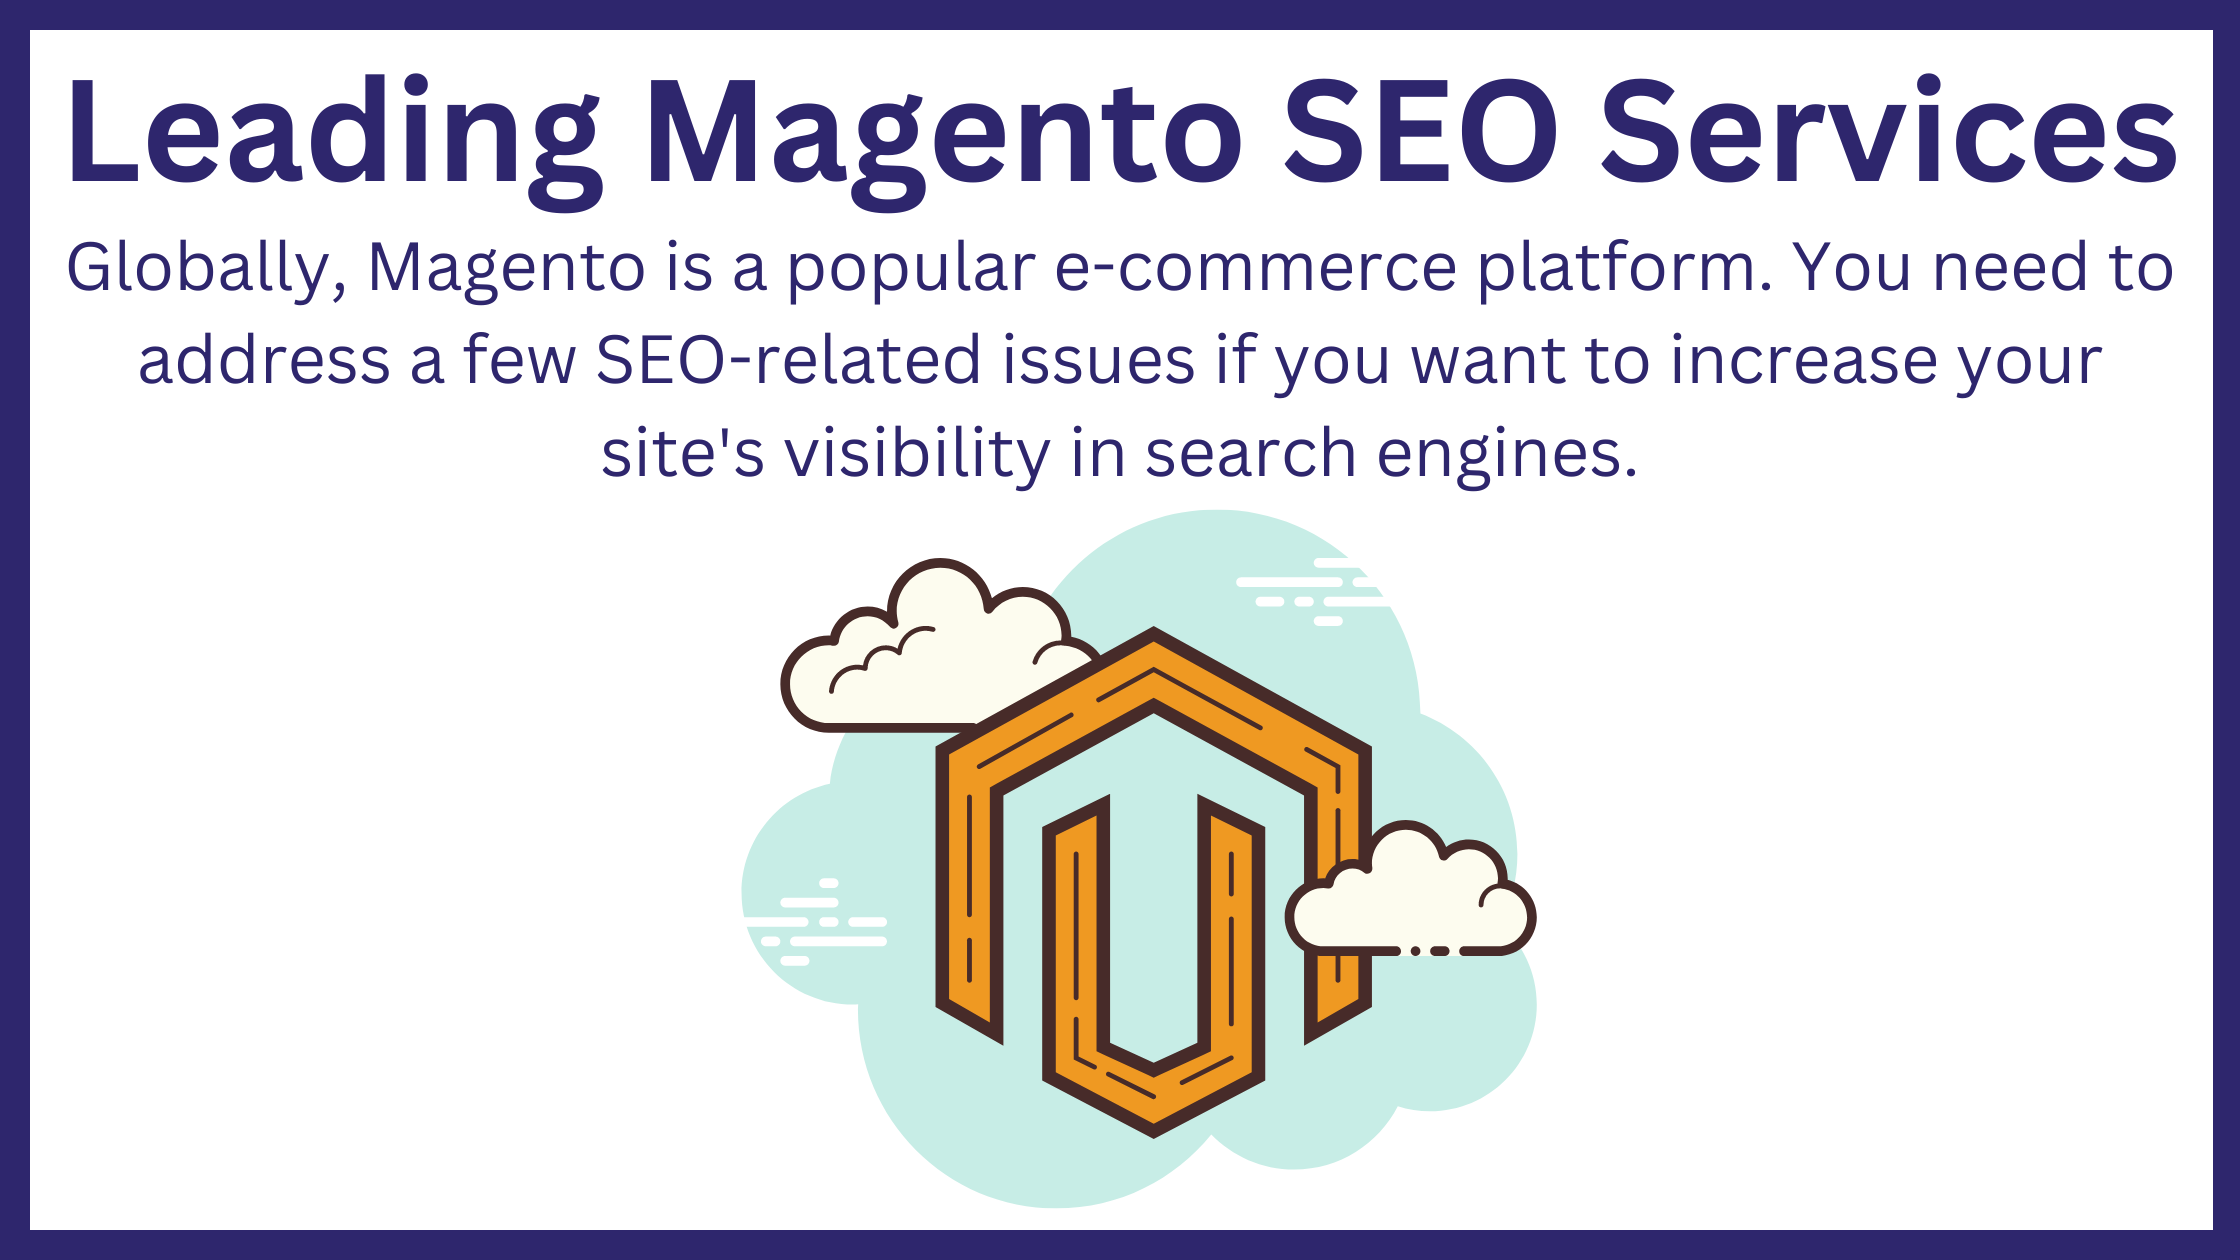 Leading Magento SEO Services.png  by BetterGraph